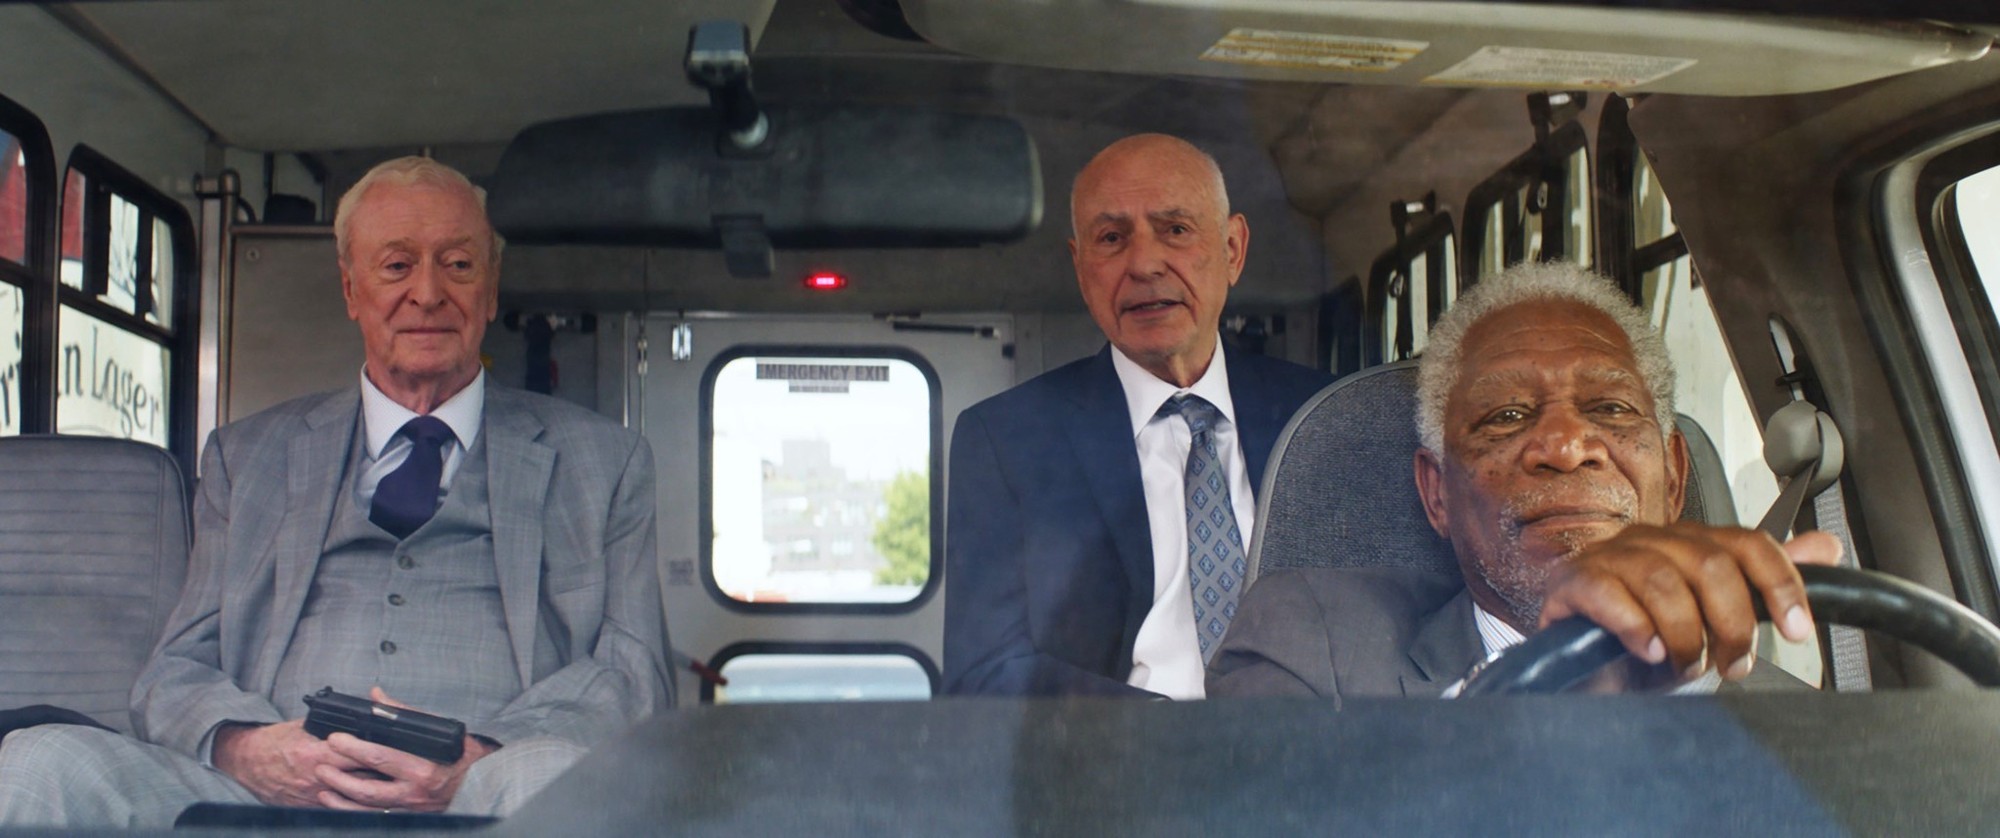 Michael Caine, Alan Arkin and Morgan Freeman in Warner Bros. Pictures' Going in Style (2017)